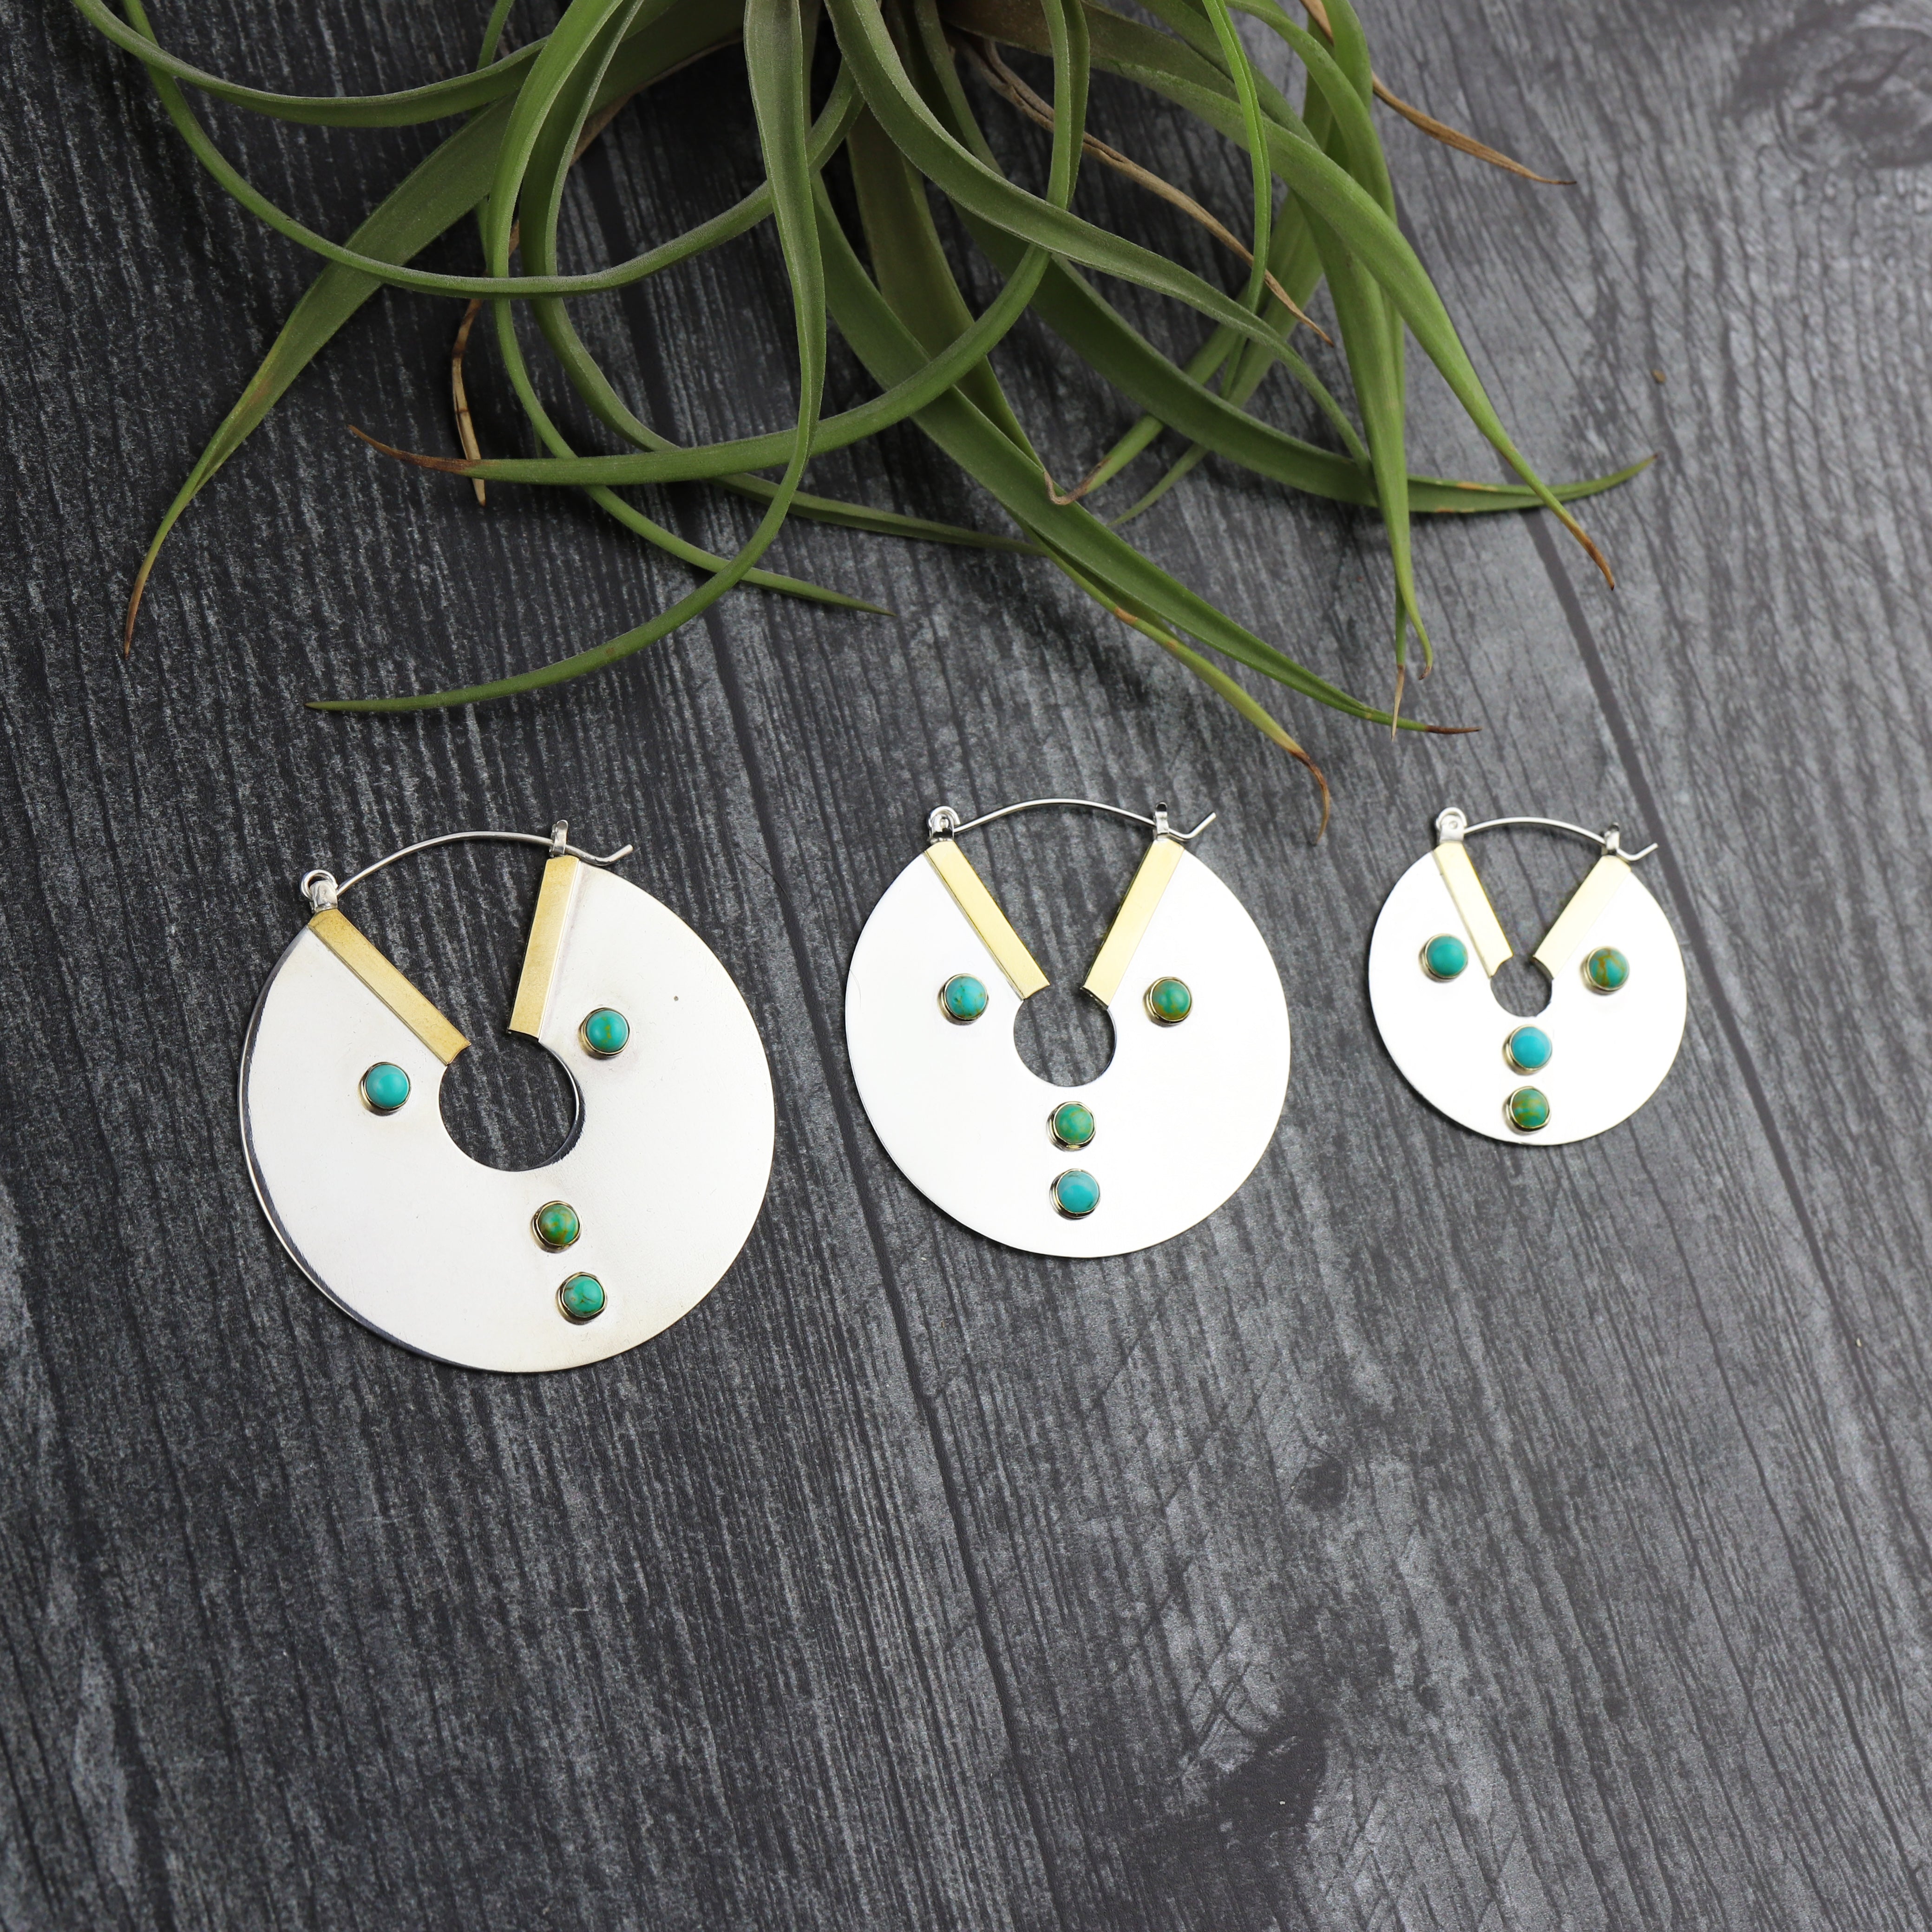 LG WildHeart Earrings with Turquoise